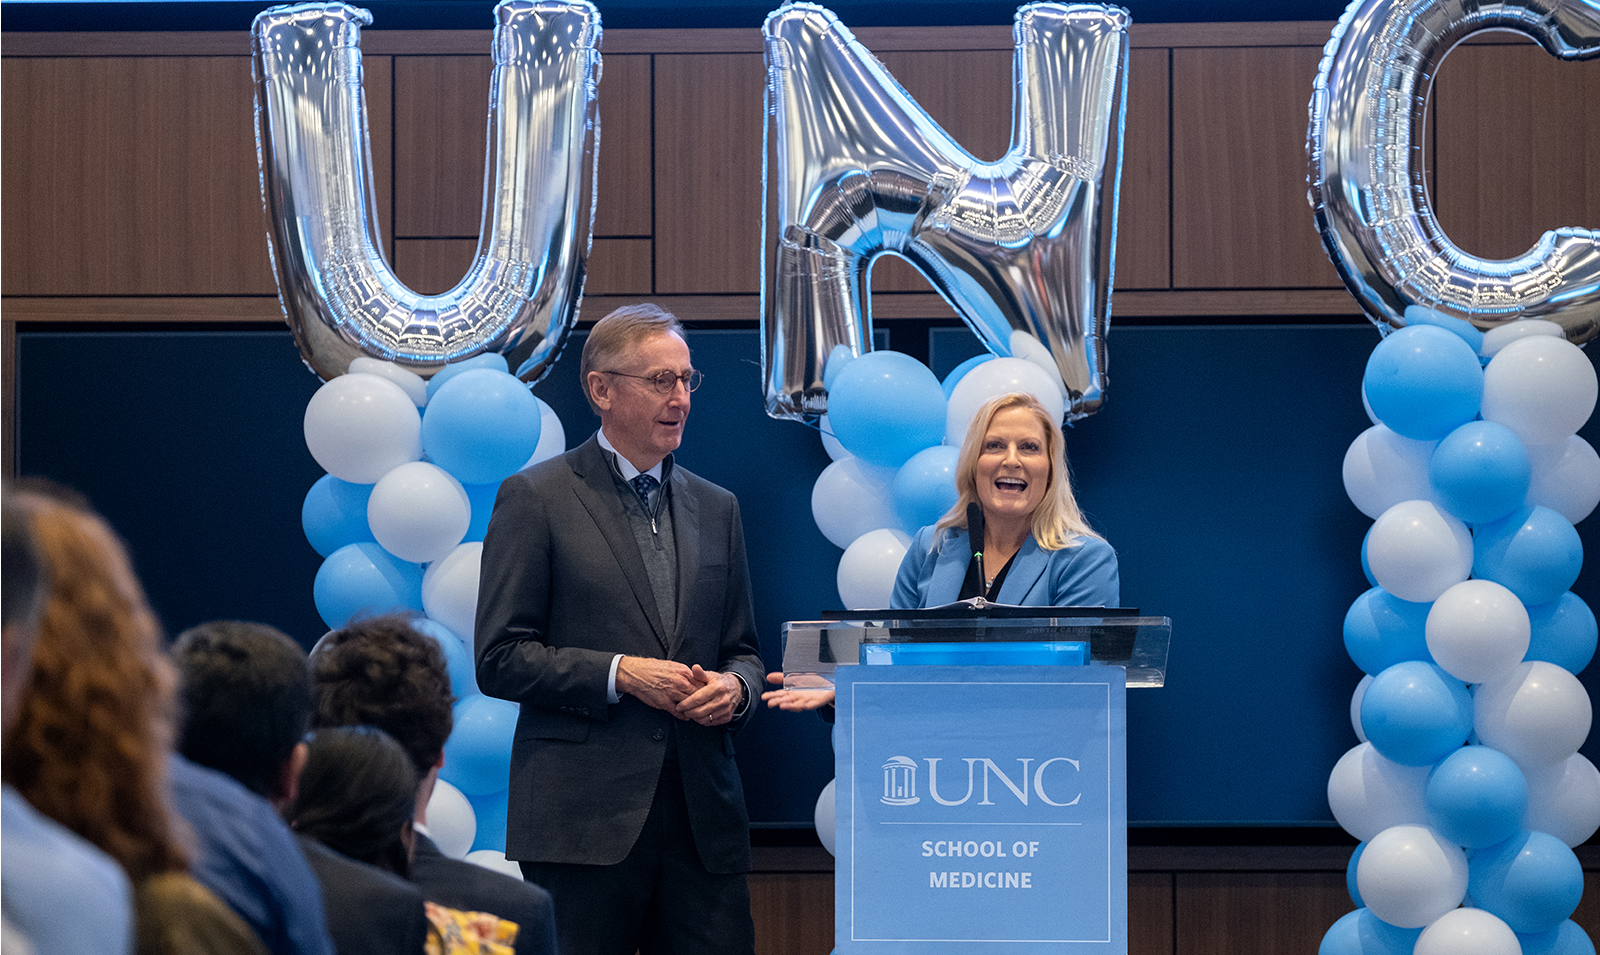 Man and woman at podium in front of UNC balloons